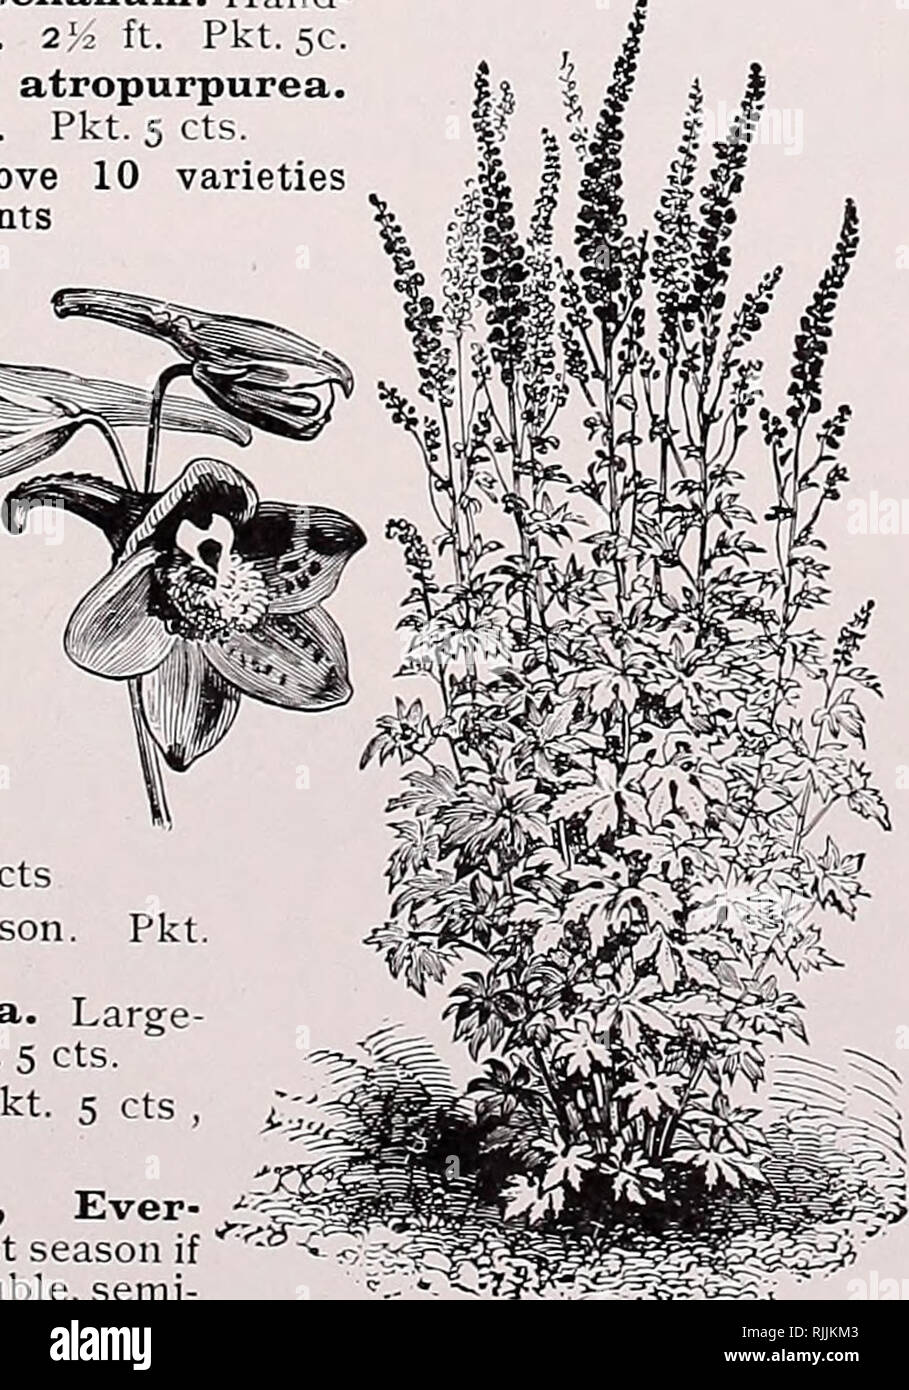 . Beckert's garden, flower &amp; lawn seeds. Commercial catalogs Seeds; Vegetables Seeds Catalogs; Bulbs (Plants) Seeds Catalogs; Fruit Seeds Catalogs; Flowers Seeds Catalogs; Garden tools Catalogs. Pkt. 5 cts. Small v^rhite spikes. for 35 cents GODETIA Bright and at- tractive compact ^g^^ growing plants, al- ways gay with a crop of their prettv flowers. Gloriosa. Flow- ers large and brilliant red ni color. Pkt. 5c. Duke of Albany. Satiny white. Pkt. 5 cts Brilliant. Bright crimson sets. Grandiflora compaeta. Large- flowering white. Pkt. 5 cts- Mixed. All colors. Pkt. 5 cts , oz. 30 cts. HOI^I Stock Photo